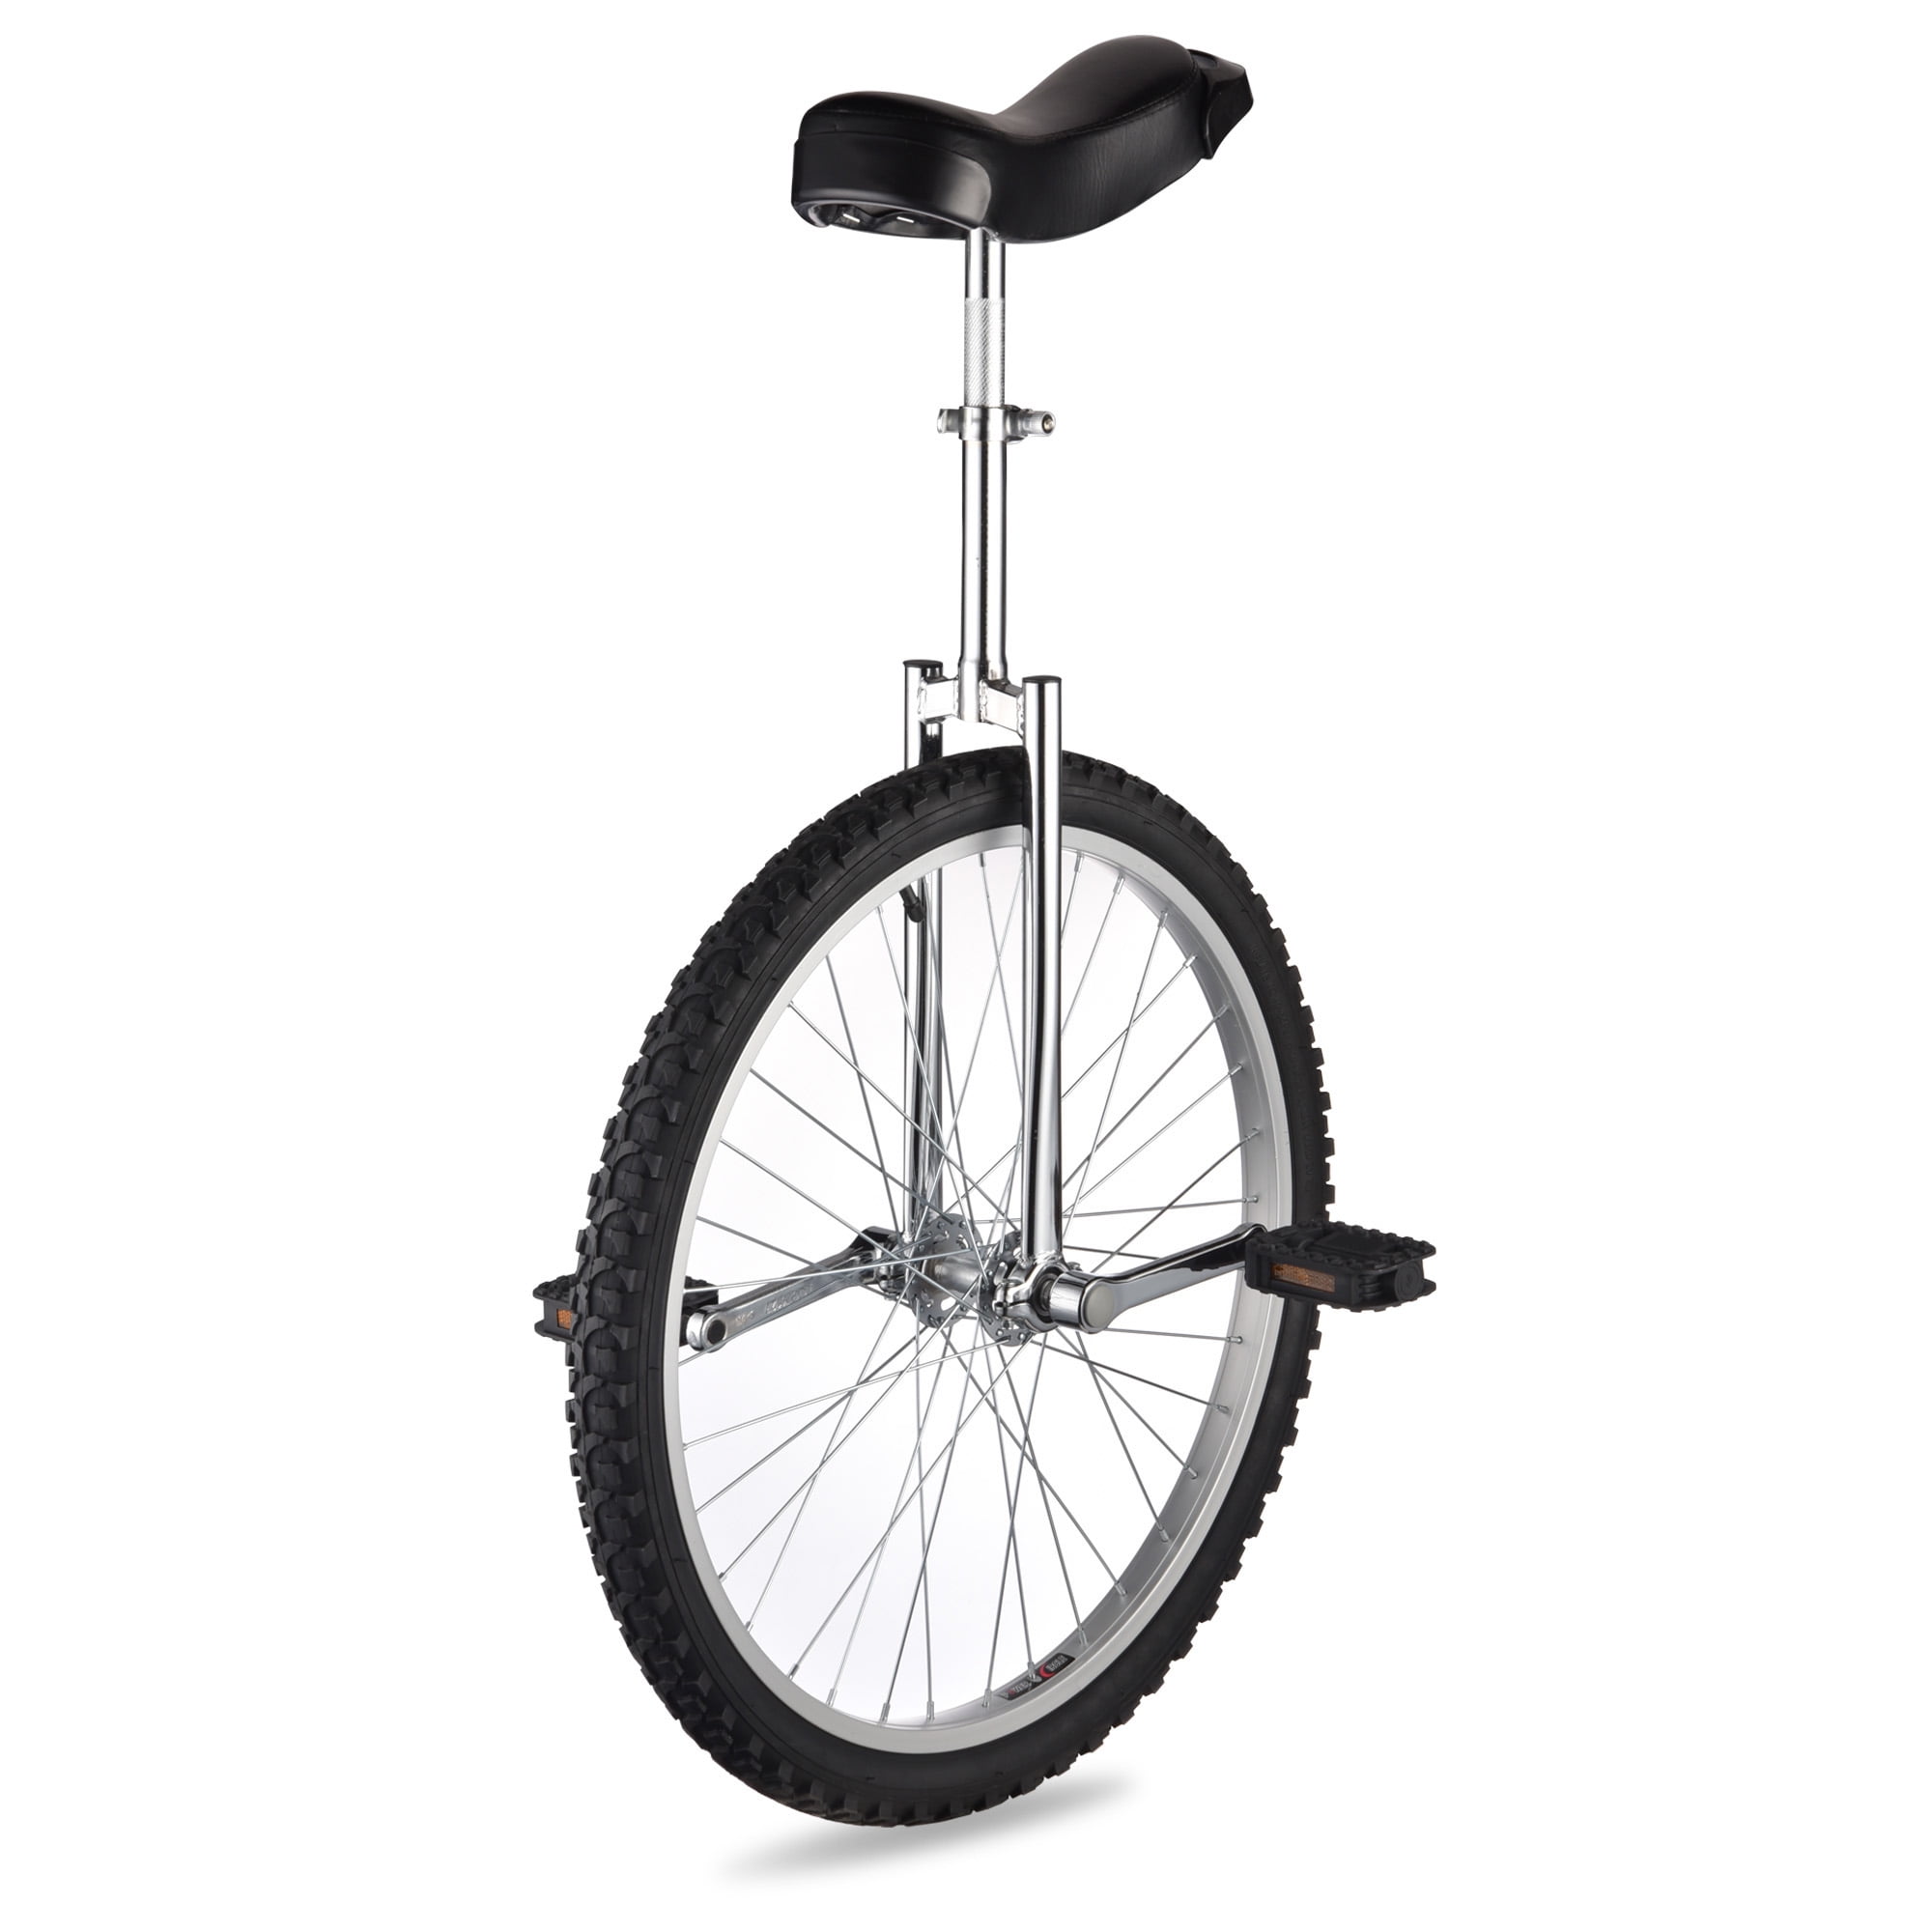 24"Butyl Tire Chrome Unicycle Wheel Cycling Mountain Exercise Balance Fitness Gy 